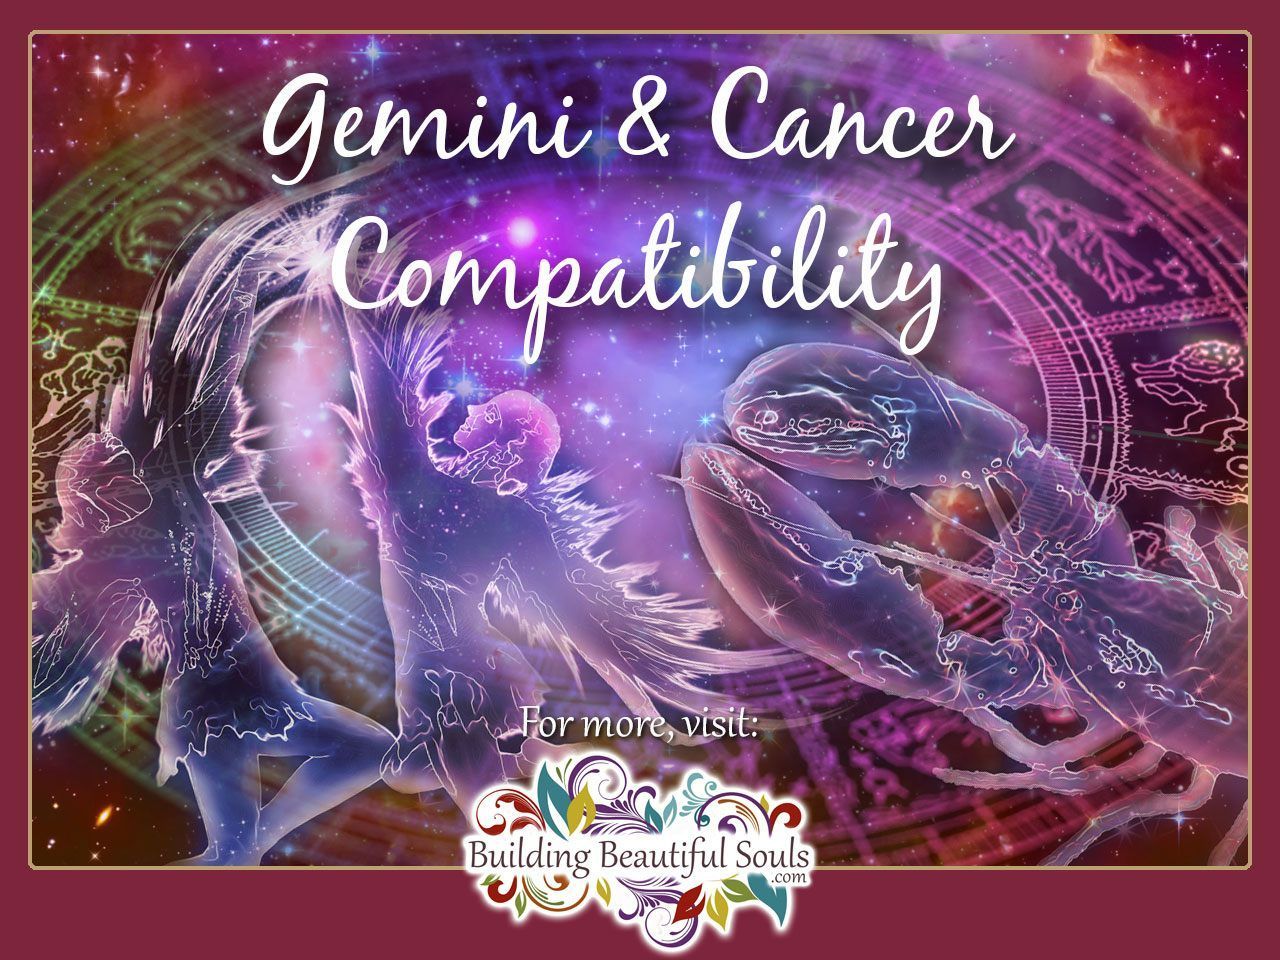 Can Cancer fall in love with Gemini?